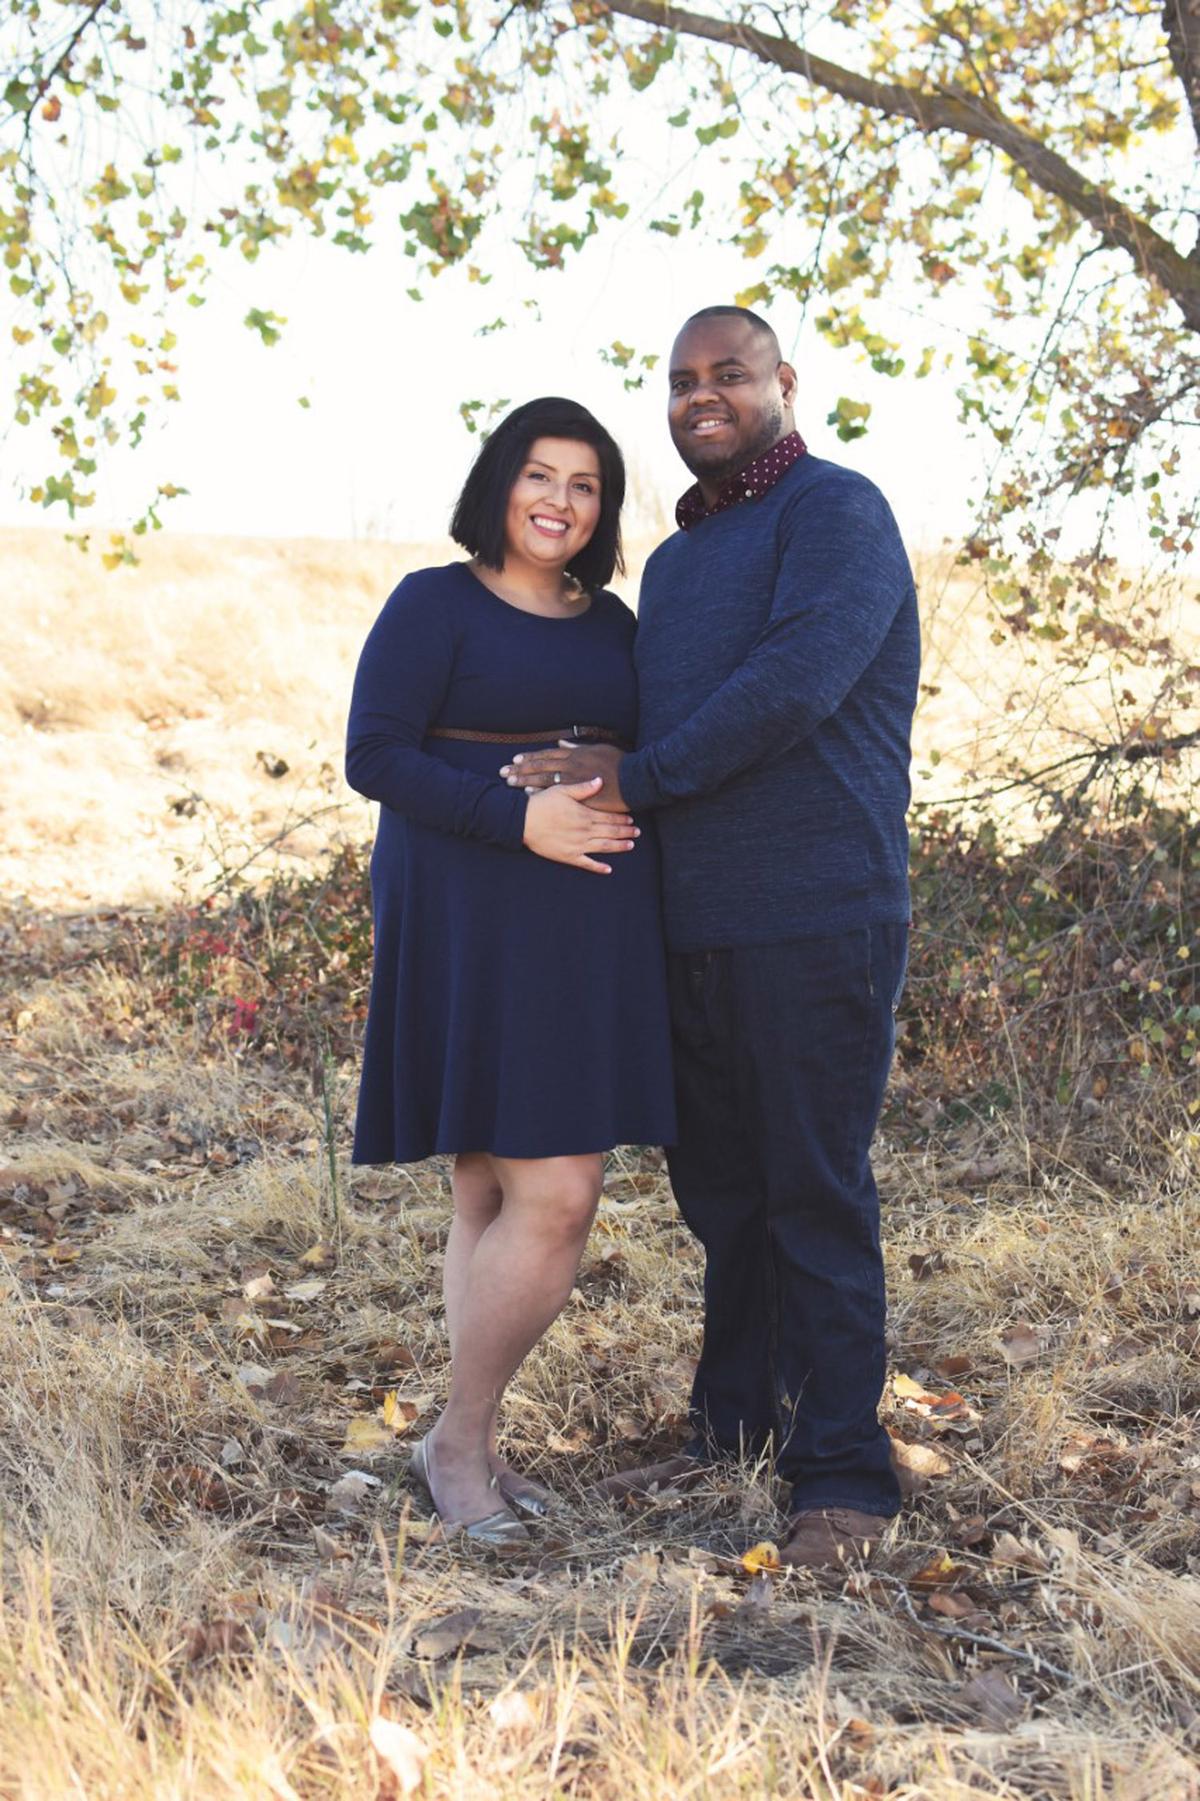 Lizeth and her husband while she was pregnant with the twins. (Caters News)